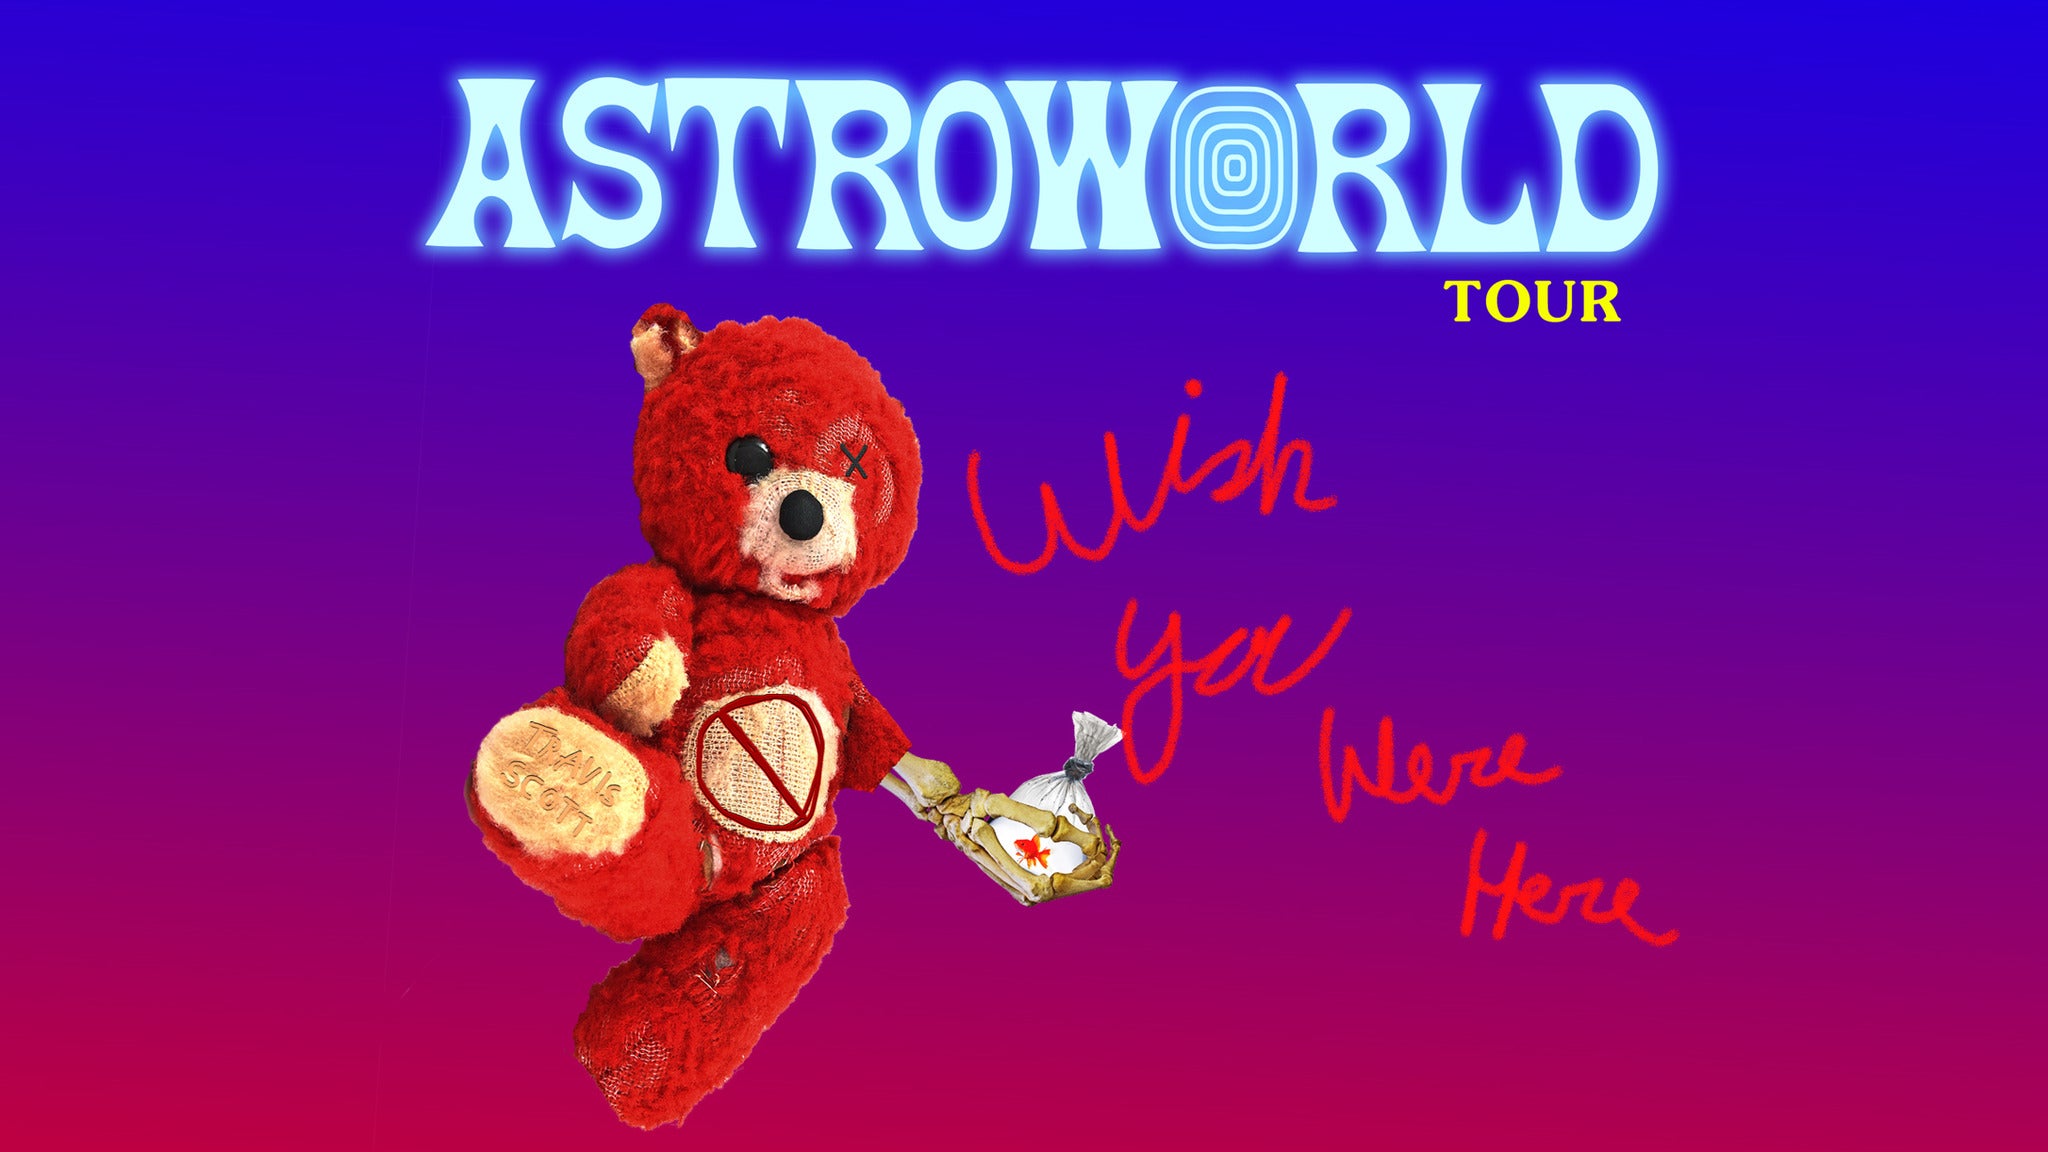 Travis Scott: Astroworld - Wish You Were Here Tour 2 in Vancouver promo photo for Facebook presale offer code